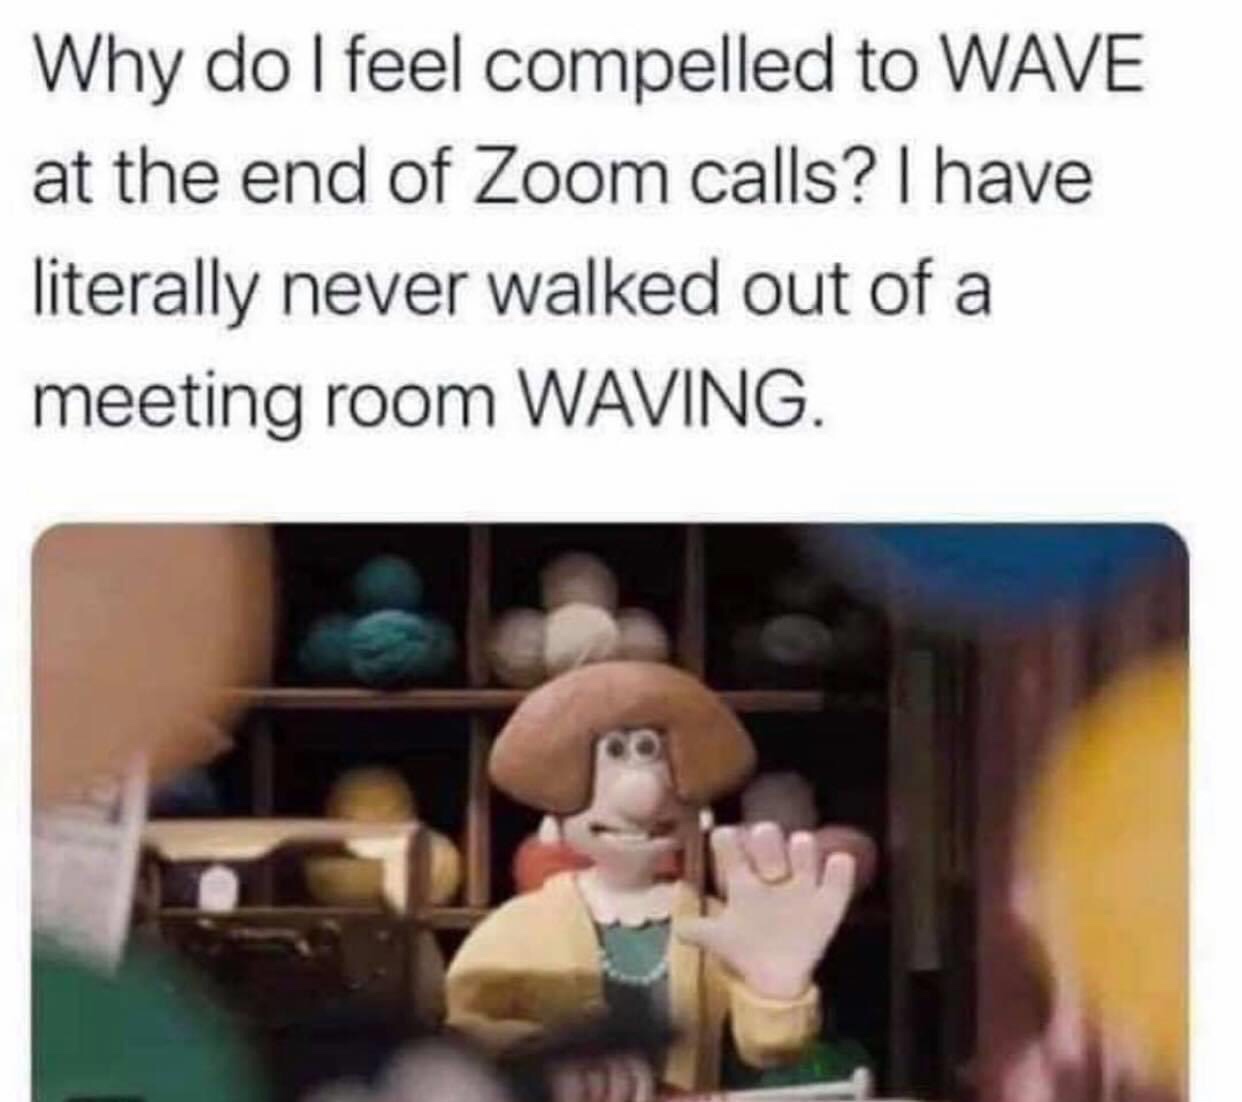 do i feel compelled to wave - Why do I feel compelled to Wave at the end of Zoom calls? I have literally never walked out of a meeting room Waving